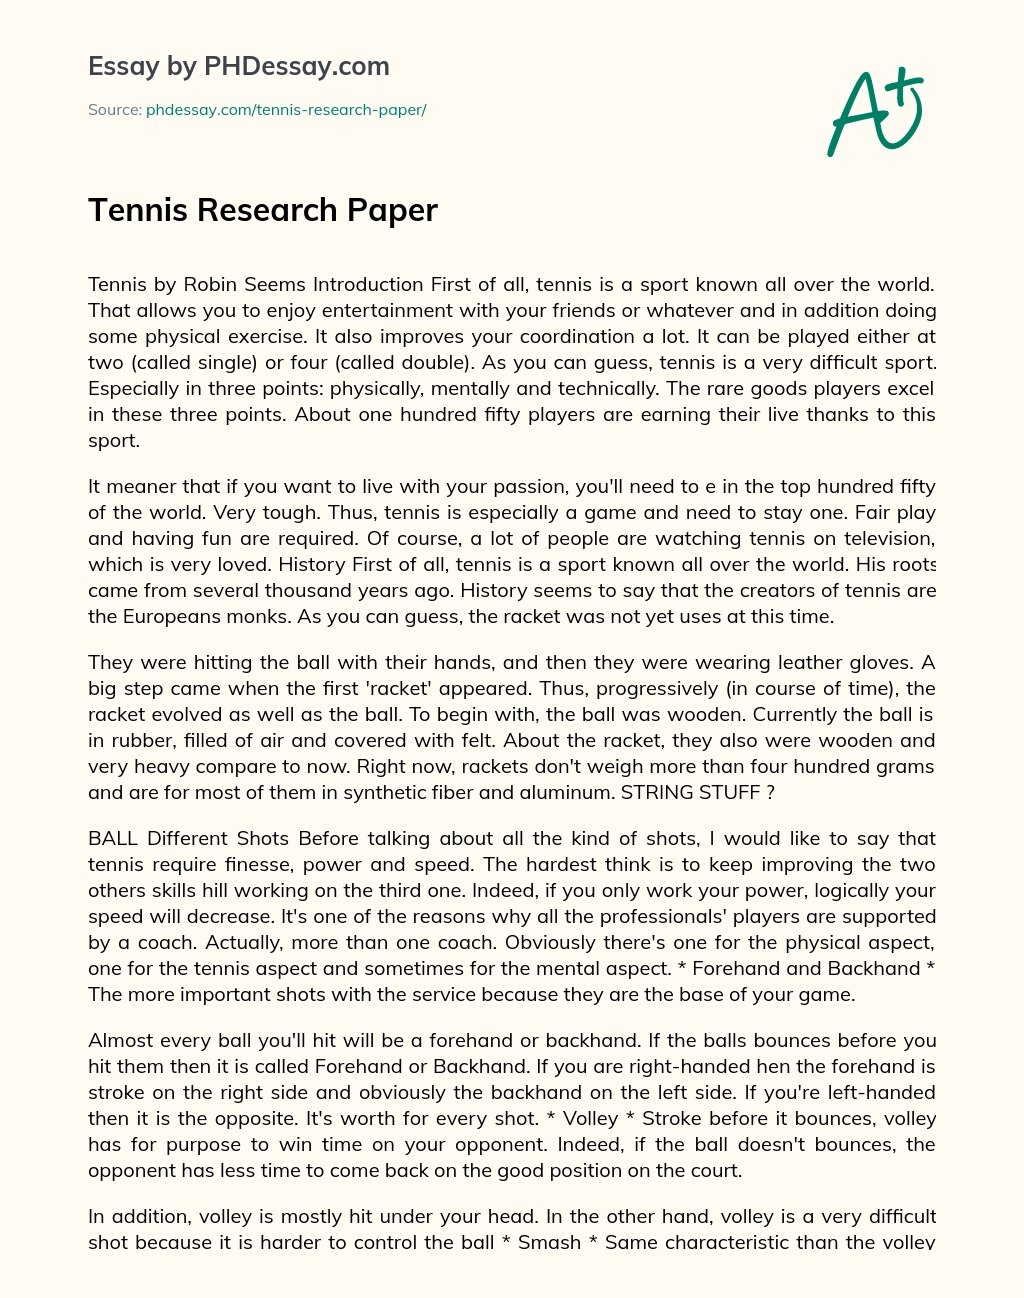 Tennis Research Paper essay